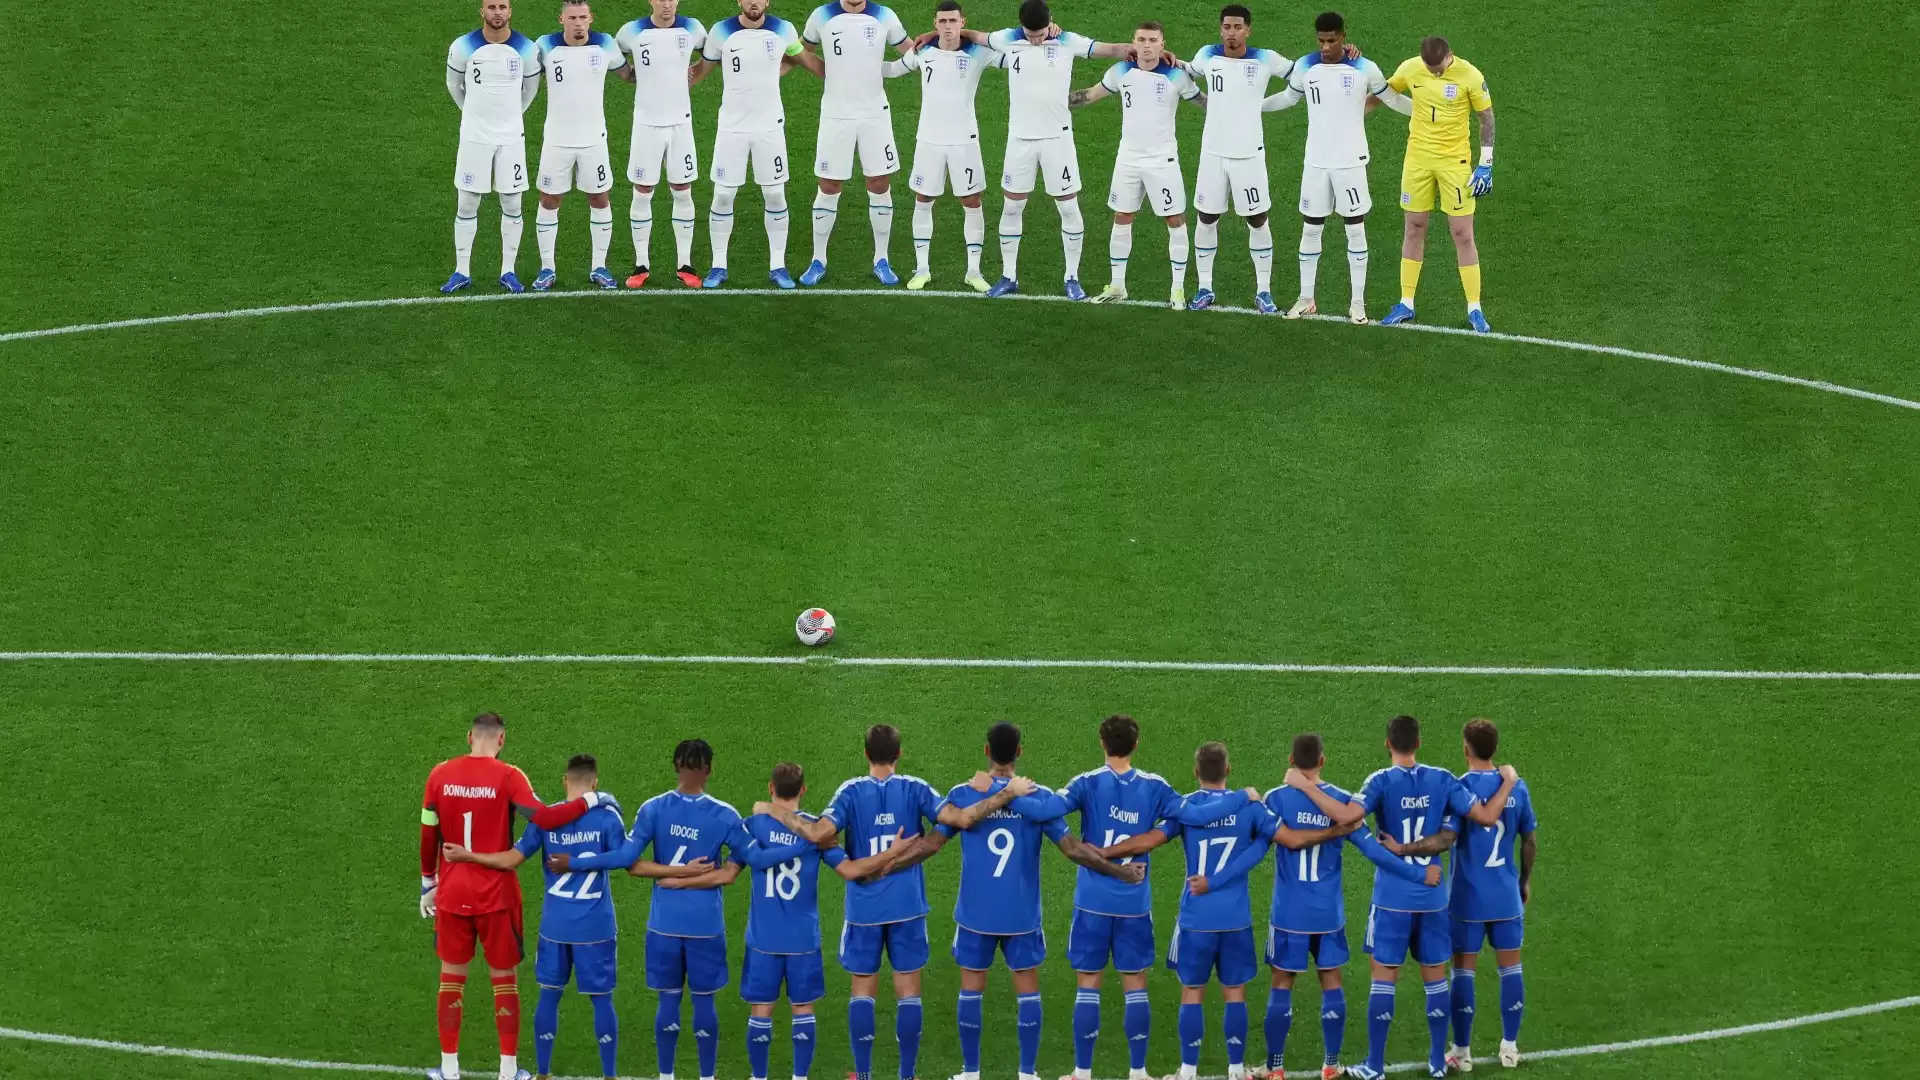 "Boos and Shouts of Free Palestine Heard During Minute's Silence at England vs Italy"